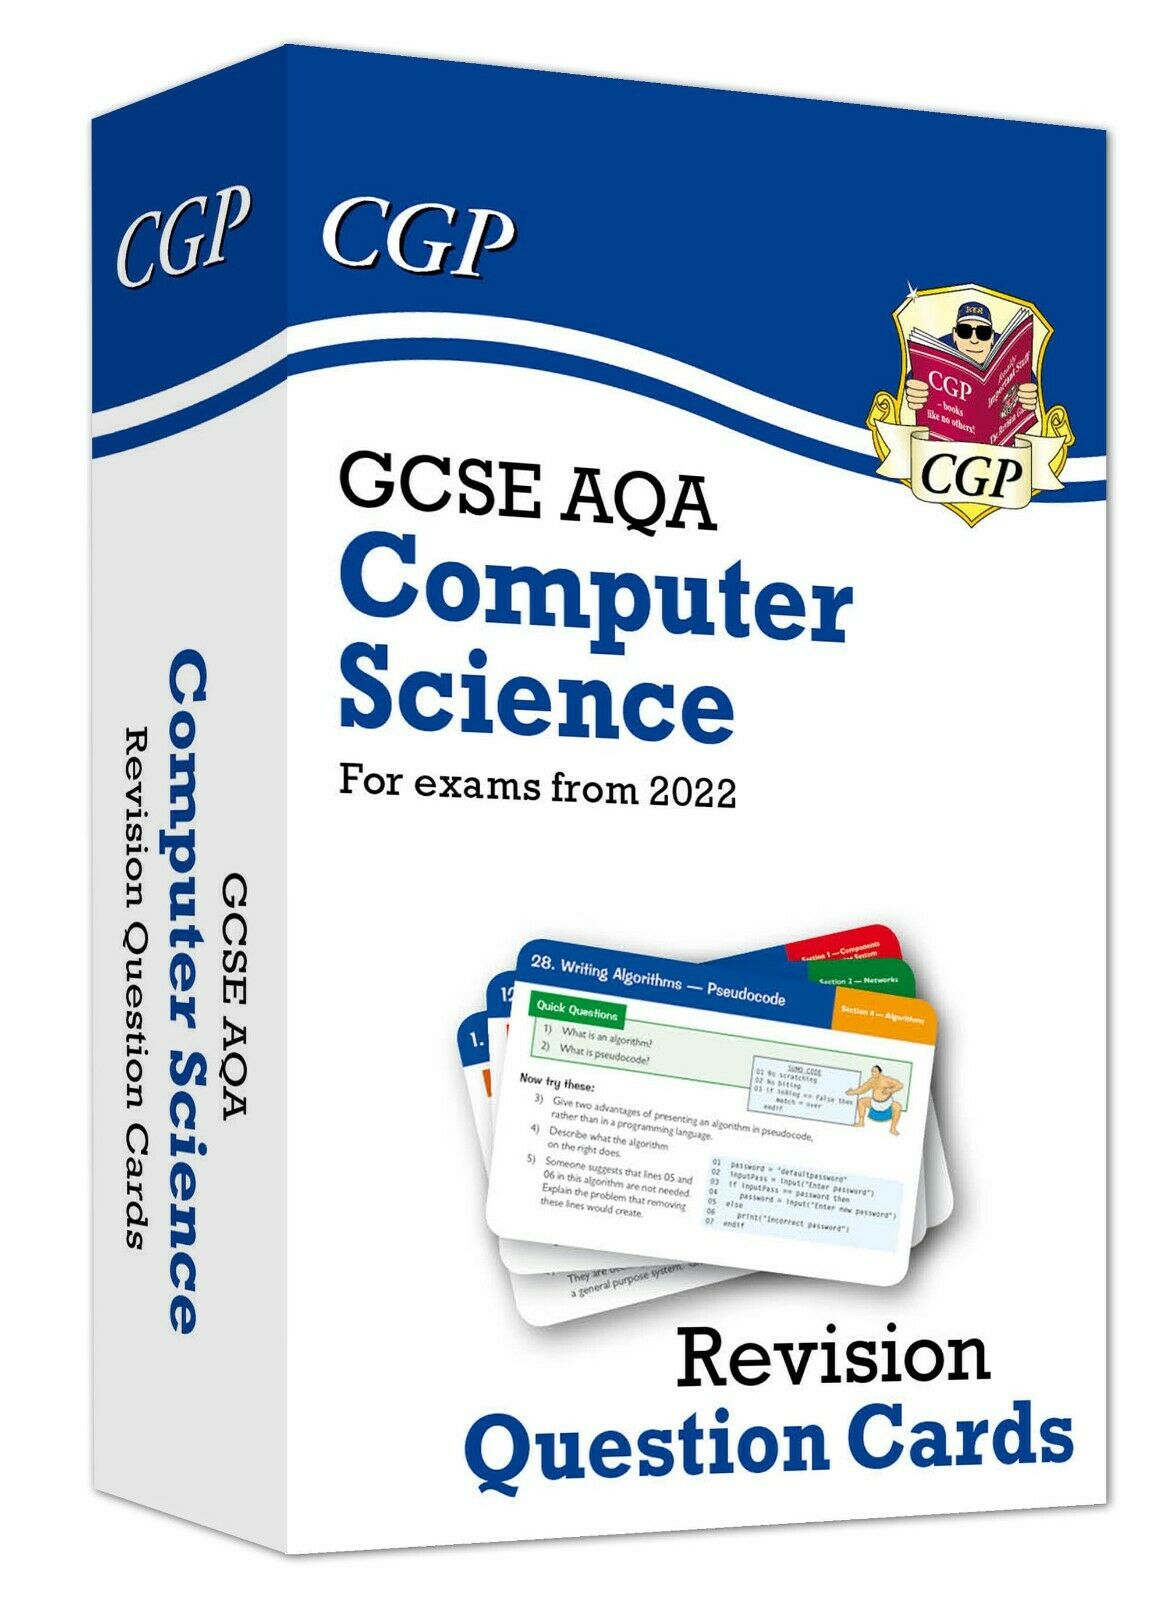 Gcse Aqa Grade 9 1 Computer Science Revision Question Cards 22 And B Books Goods